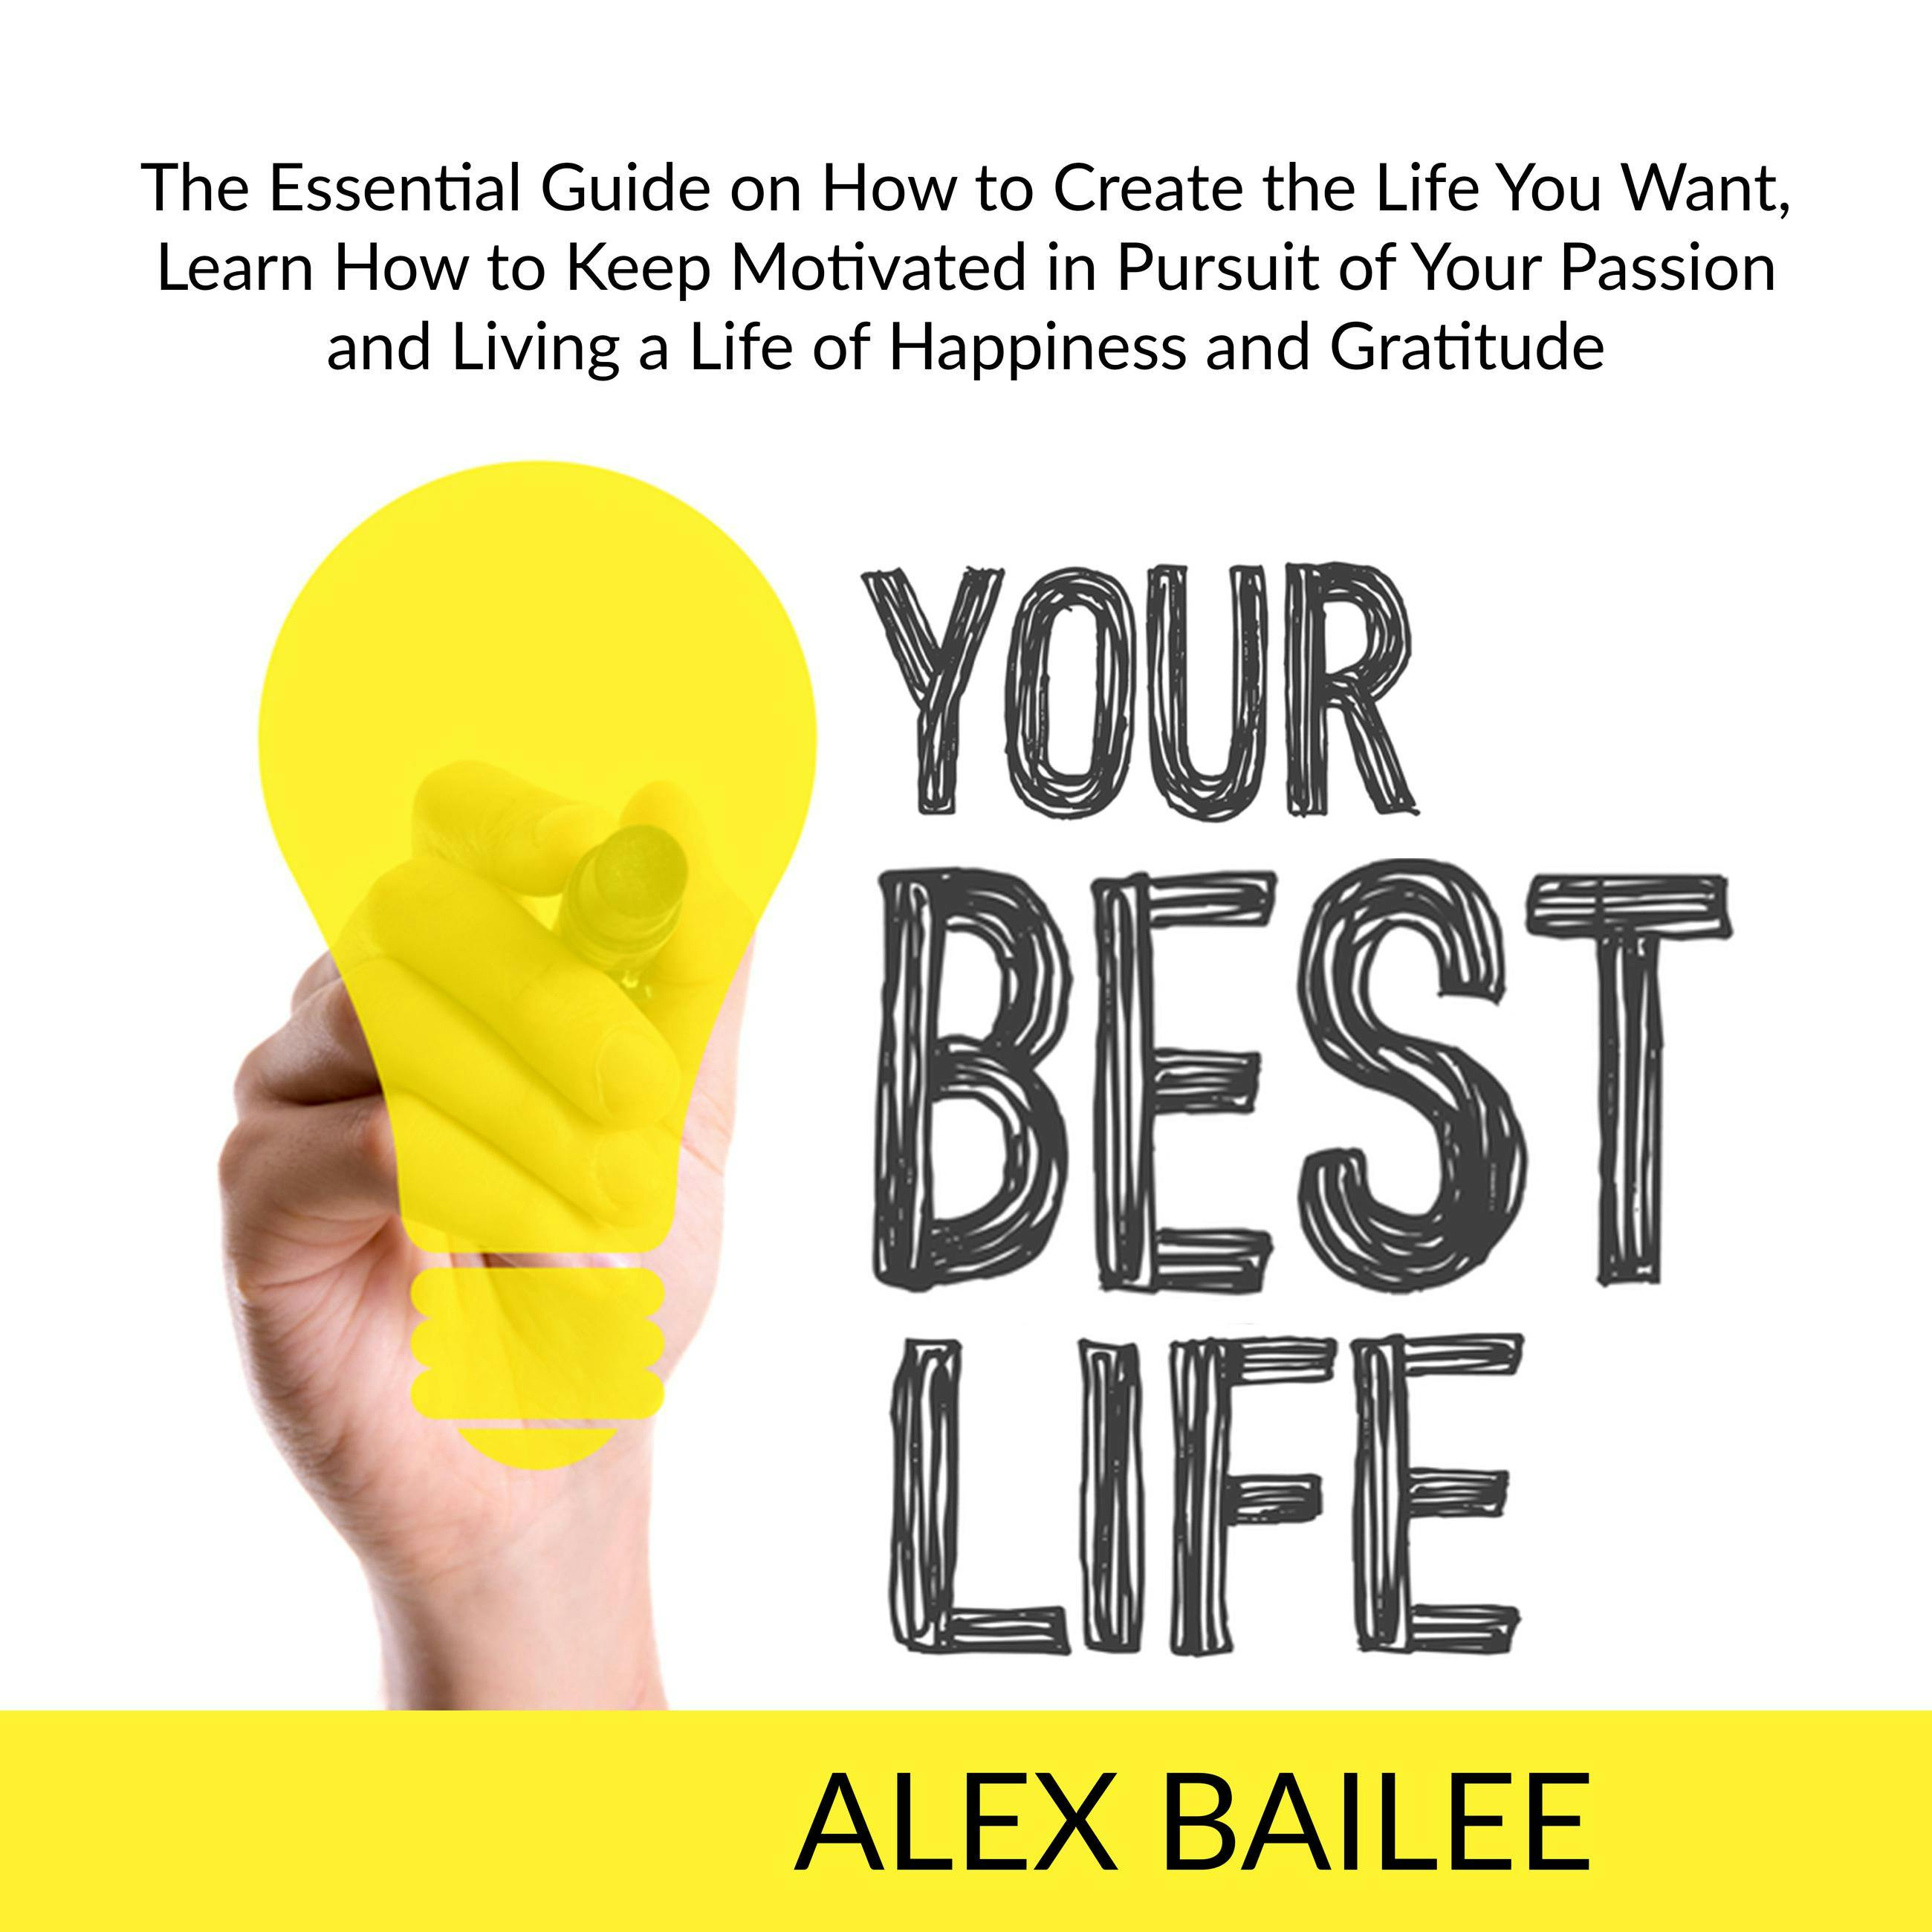 Your Best Life: The Essential Guide on How to Create the Life You Want, Learn How to Keep Motivated in Pursuing Your Passion and Living a Life of Happiness and Gratitude - Alex Bailee